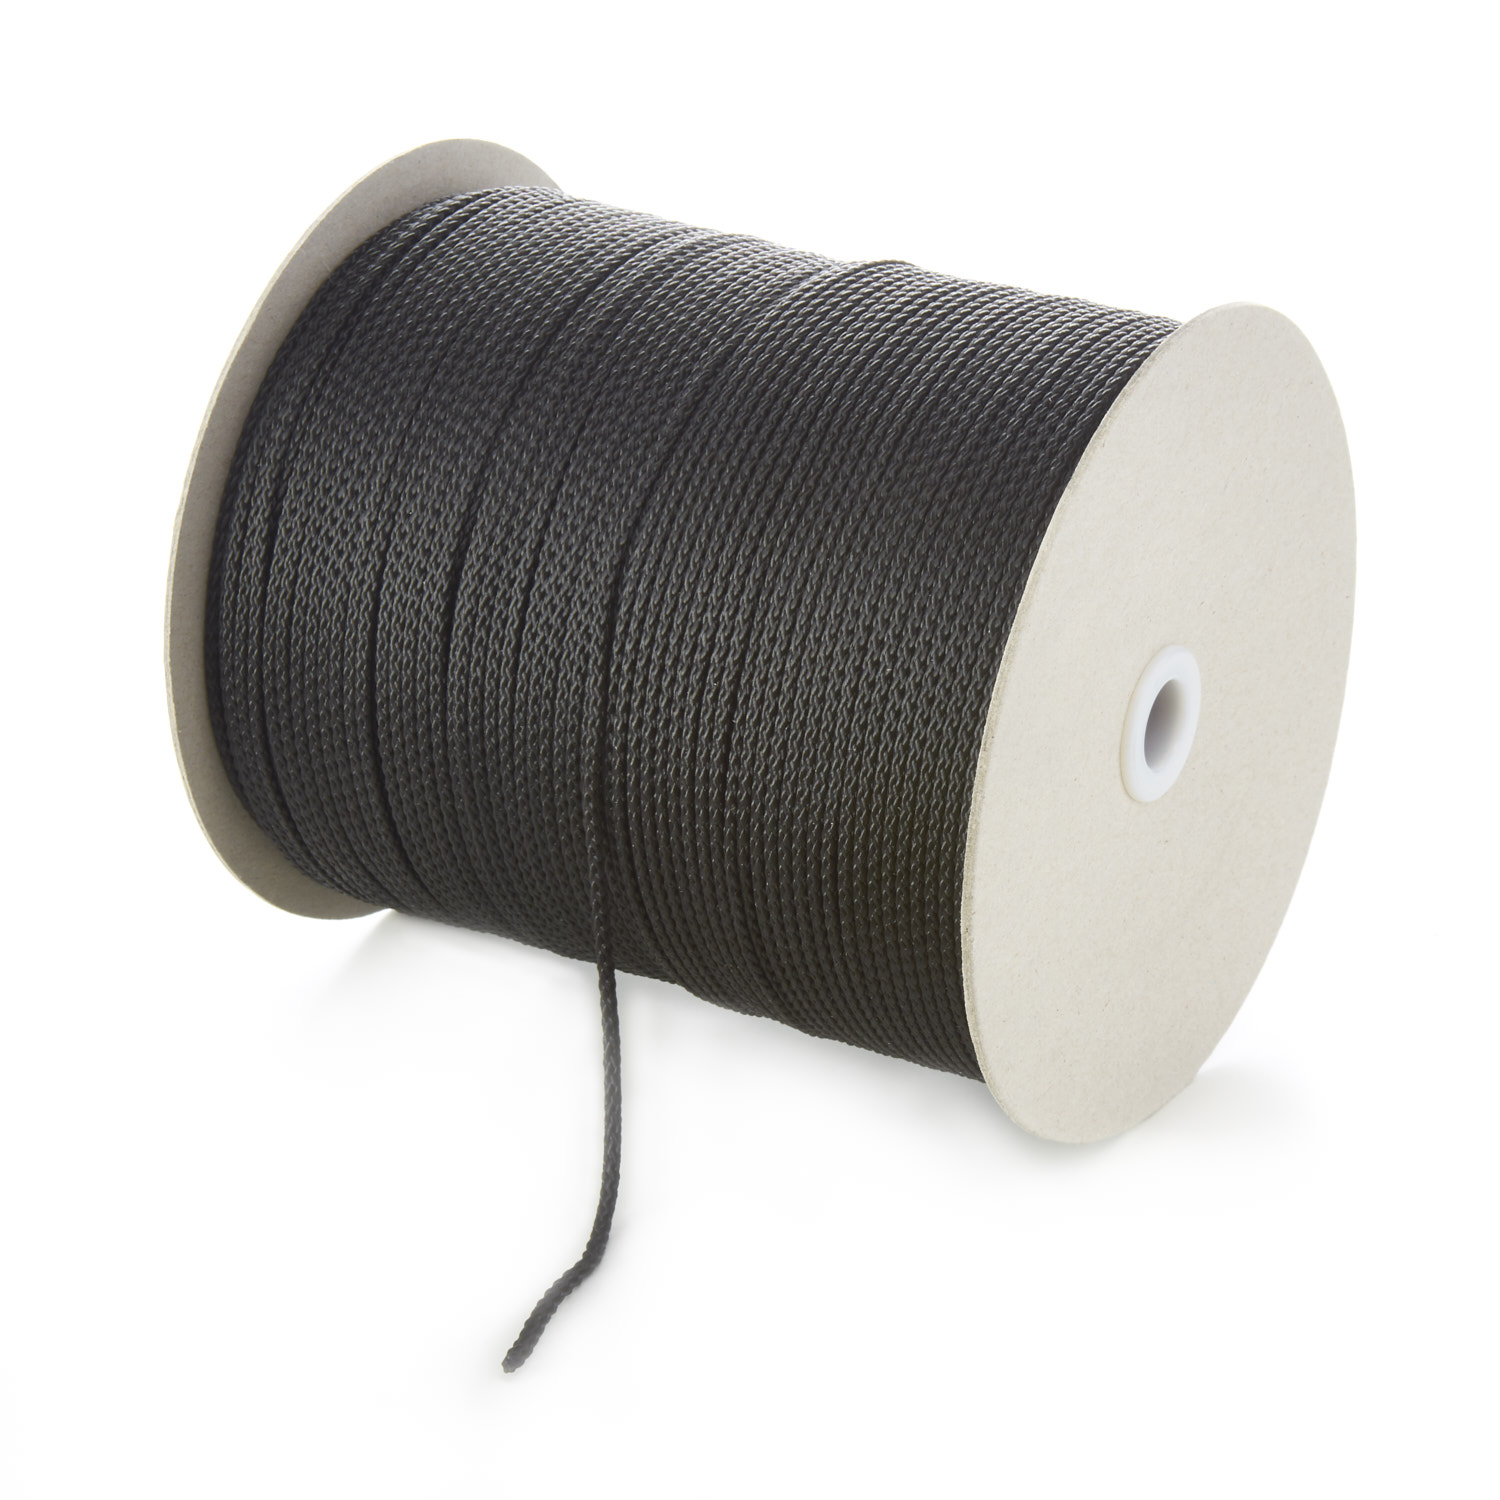 3mm Round Polypropylene Cord - Braided Poly Cord UK Manufacturers